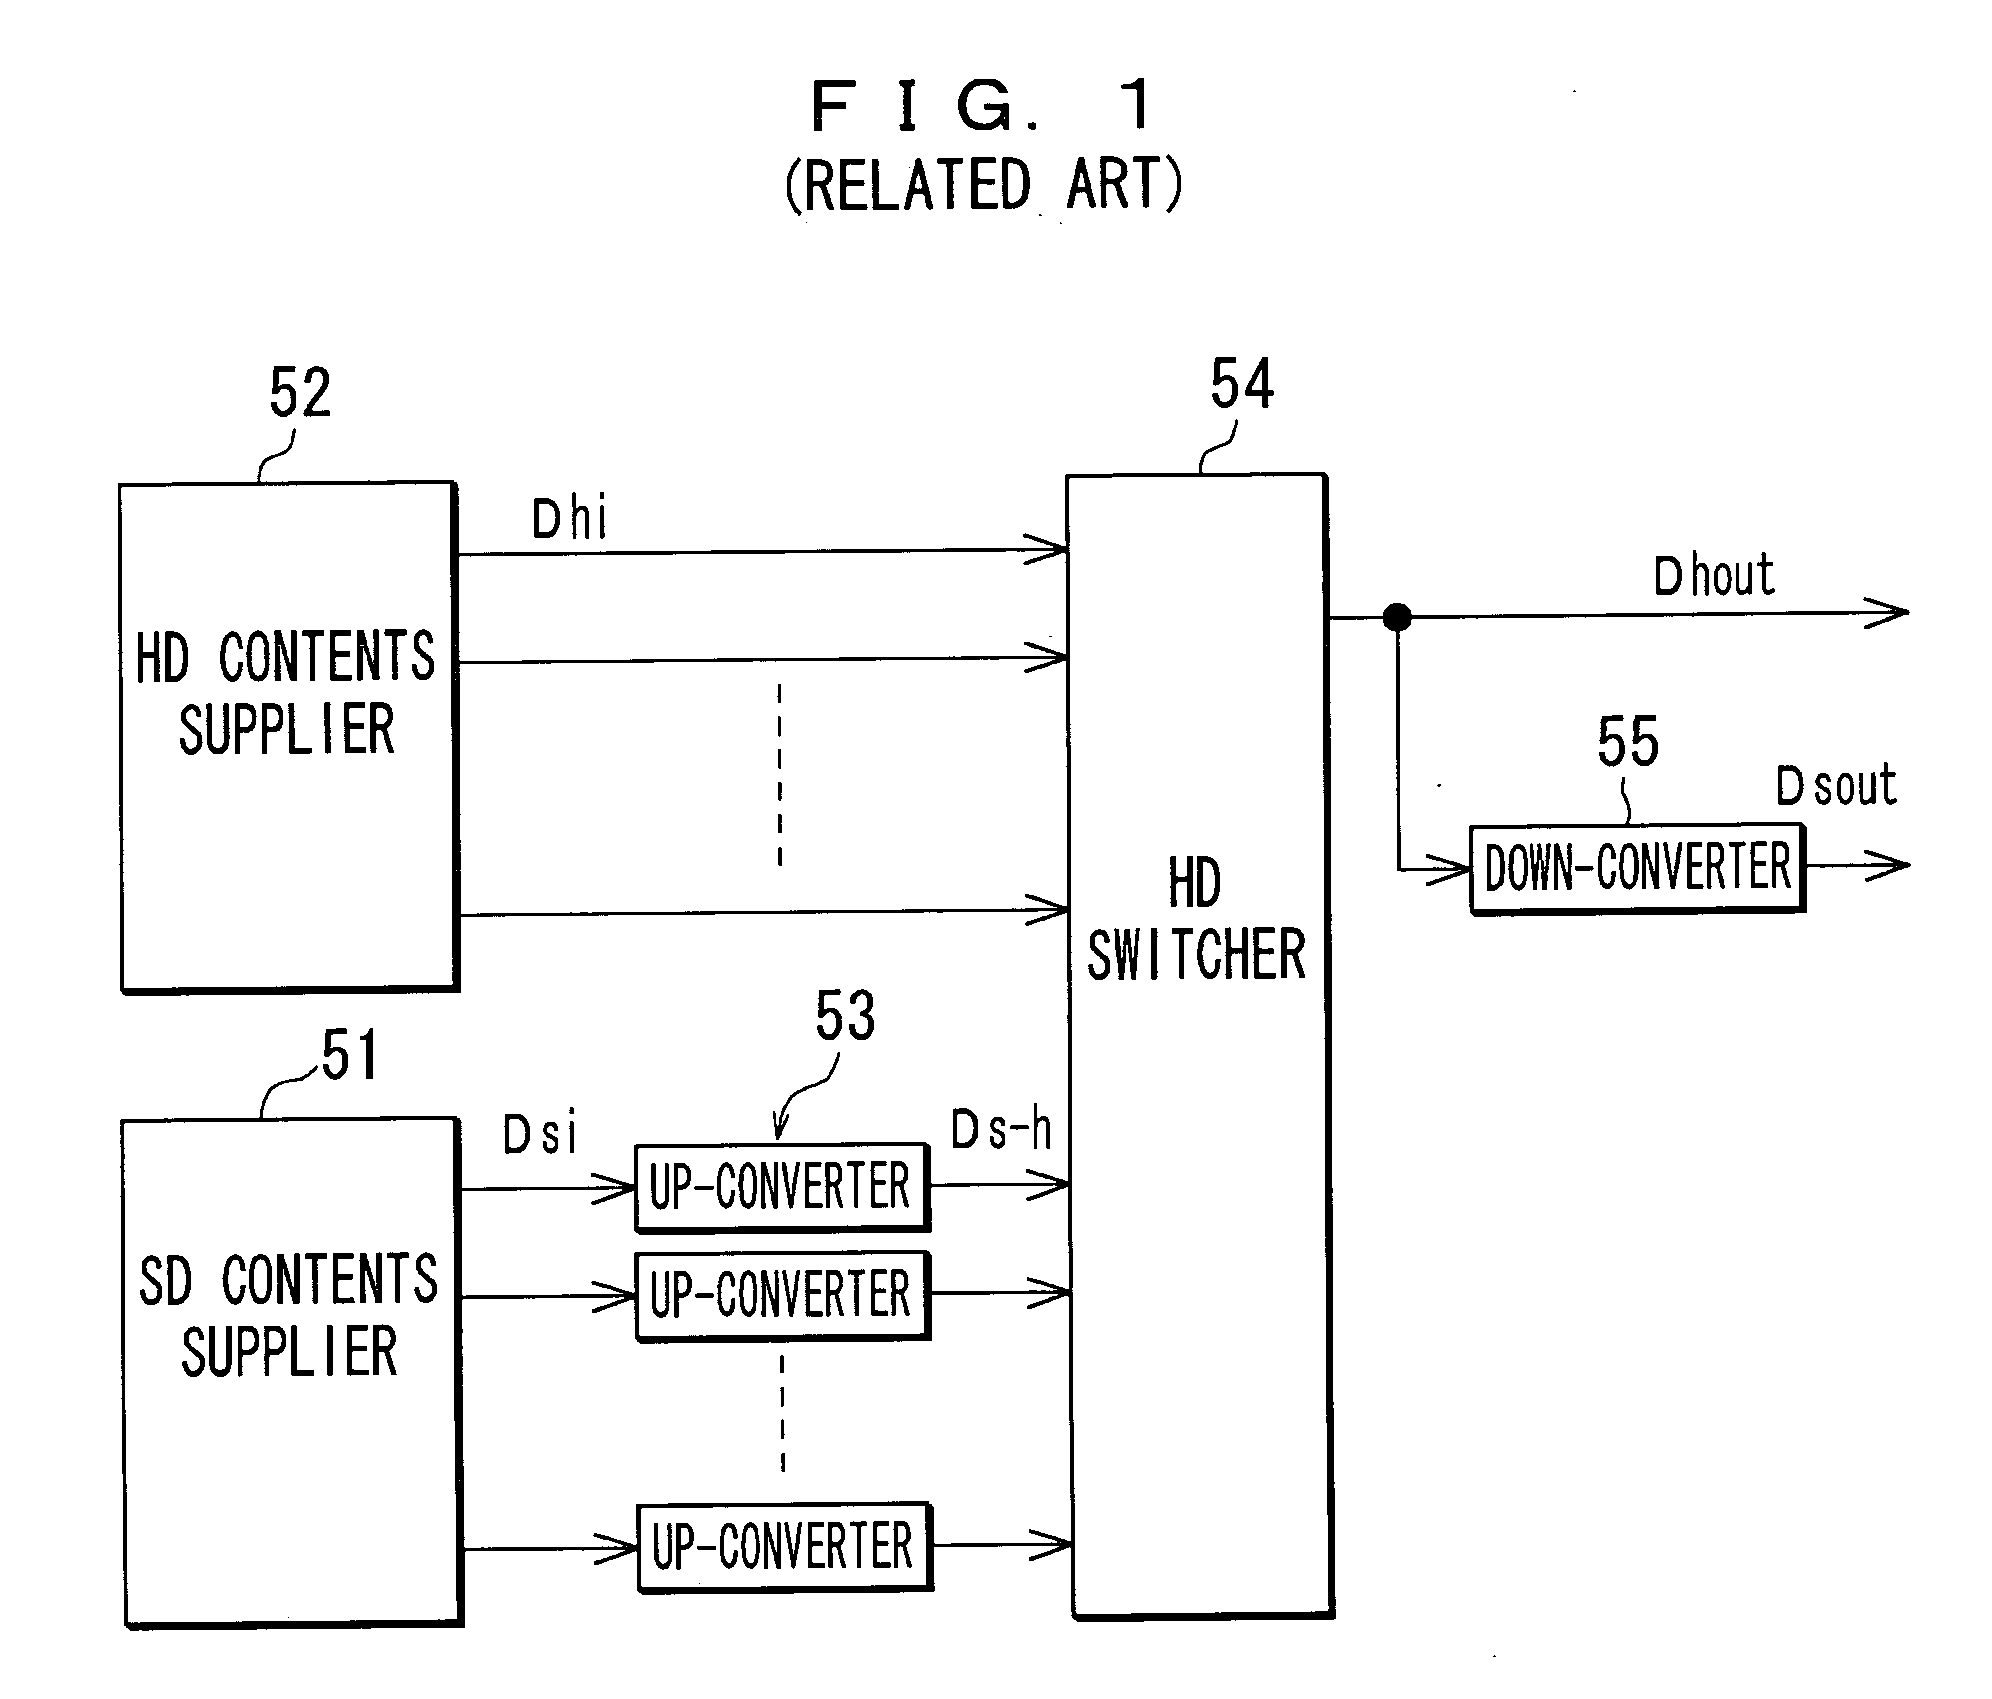 System for delivering contents automatically